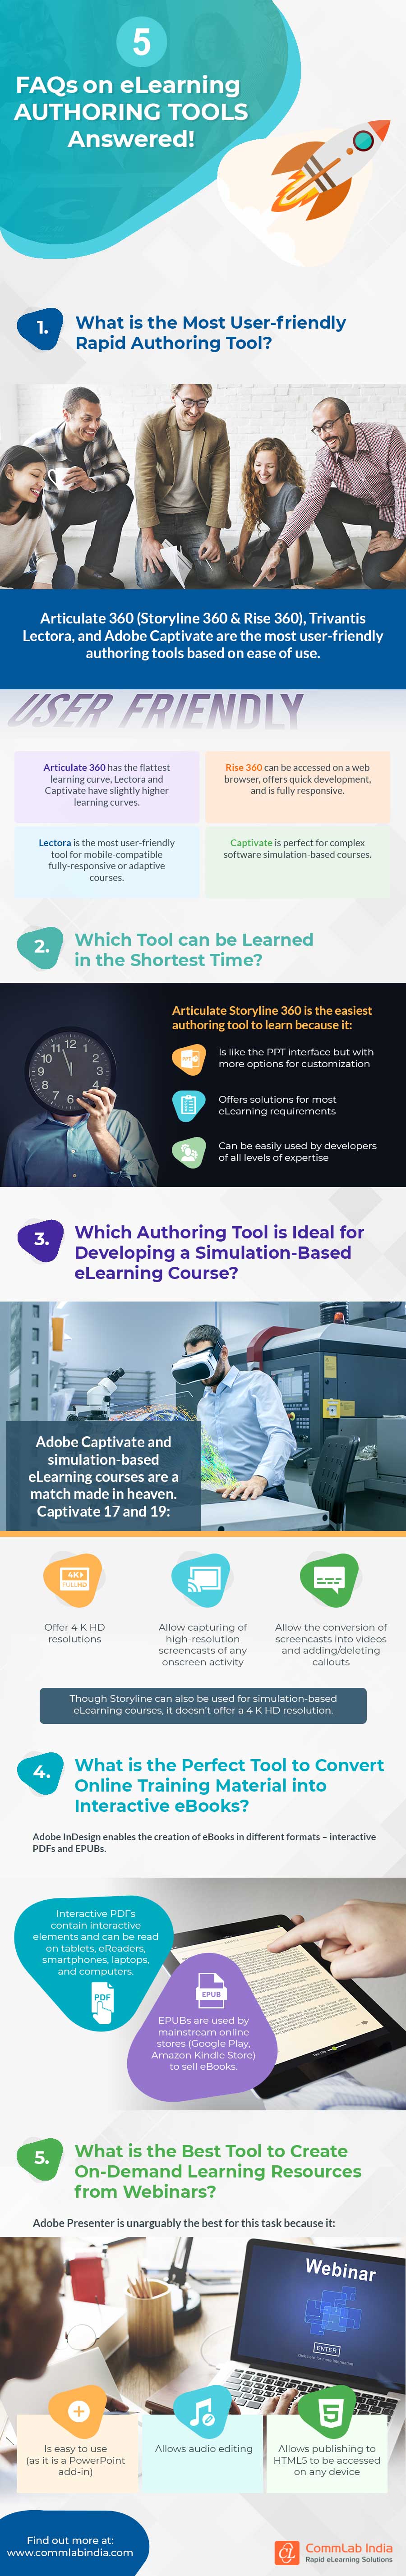 Authoring Tools in eLearning: Top 5 Questions Answered!